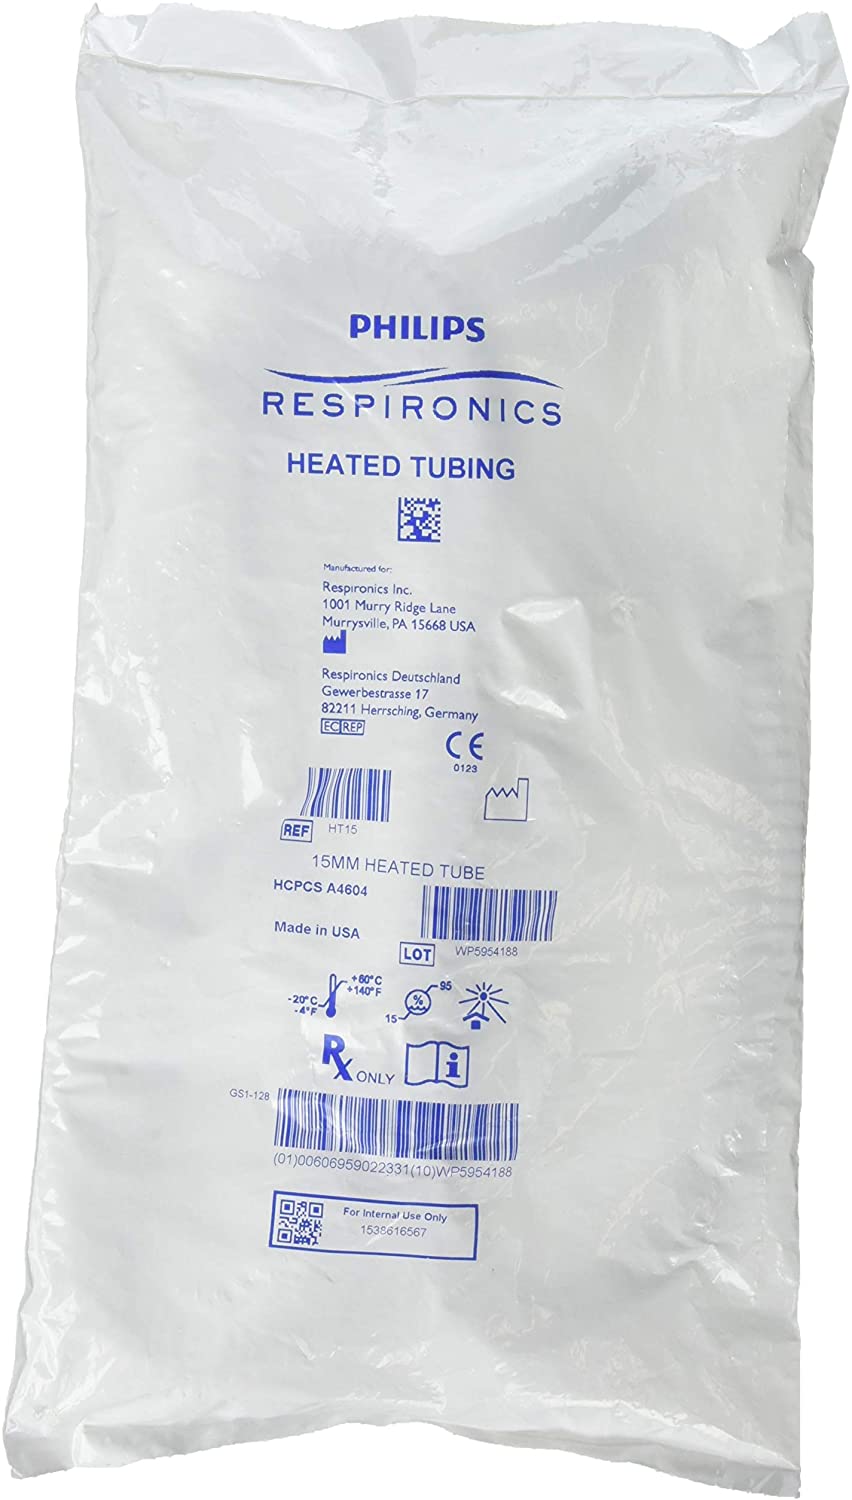 Replacement Tubing for PAP device, Option of Heated Tubing or non-Heated tubing or light-weight tubing